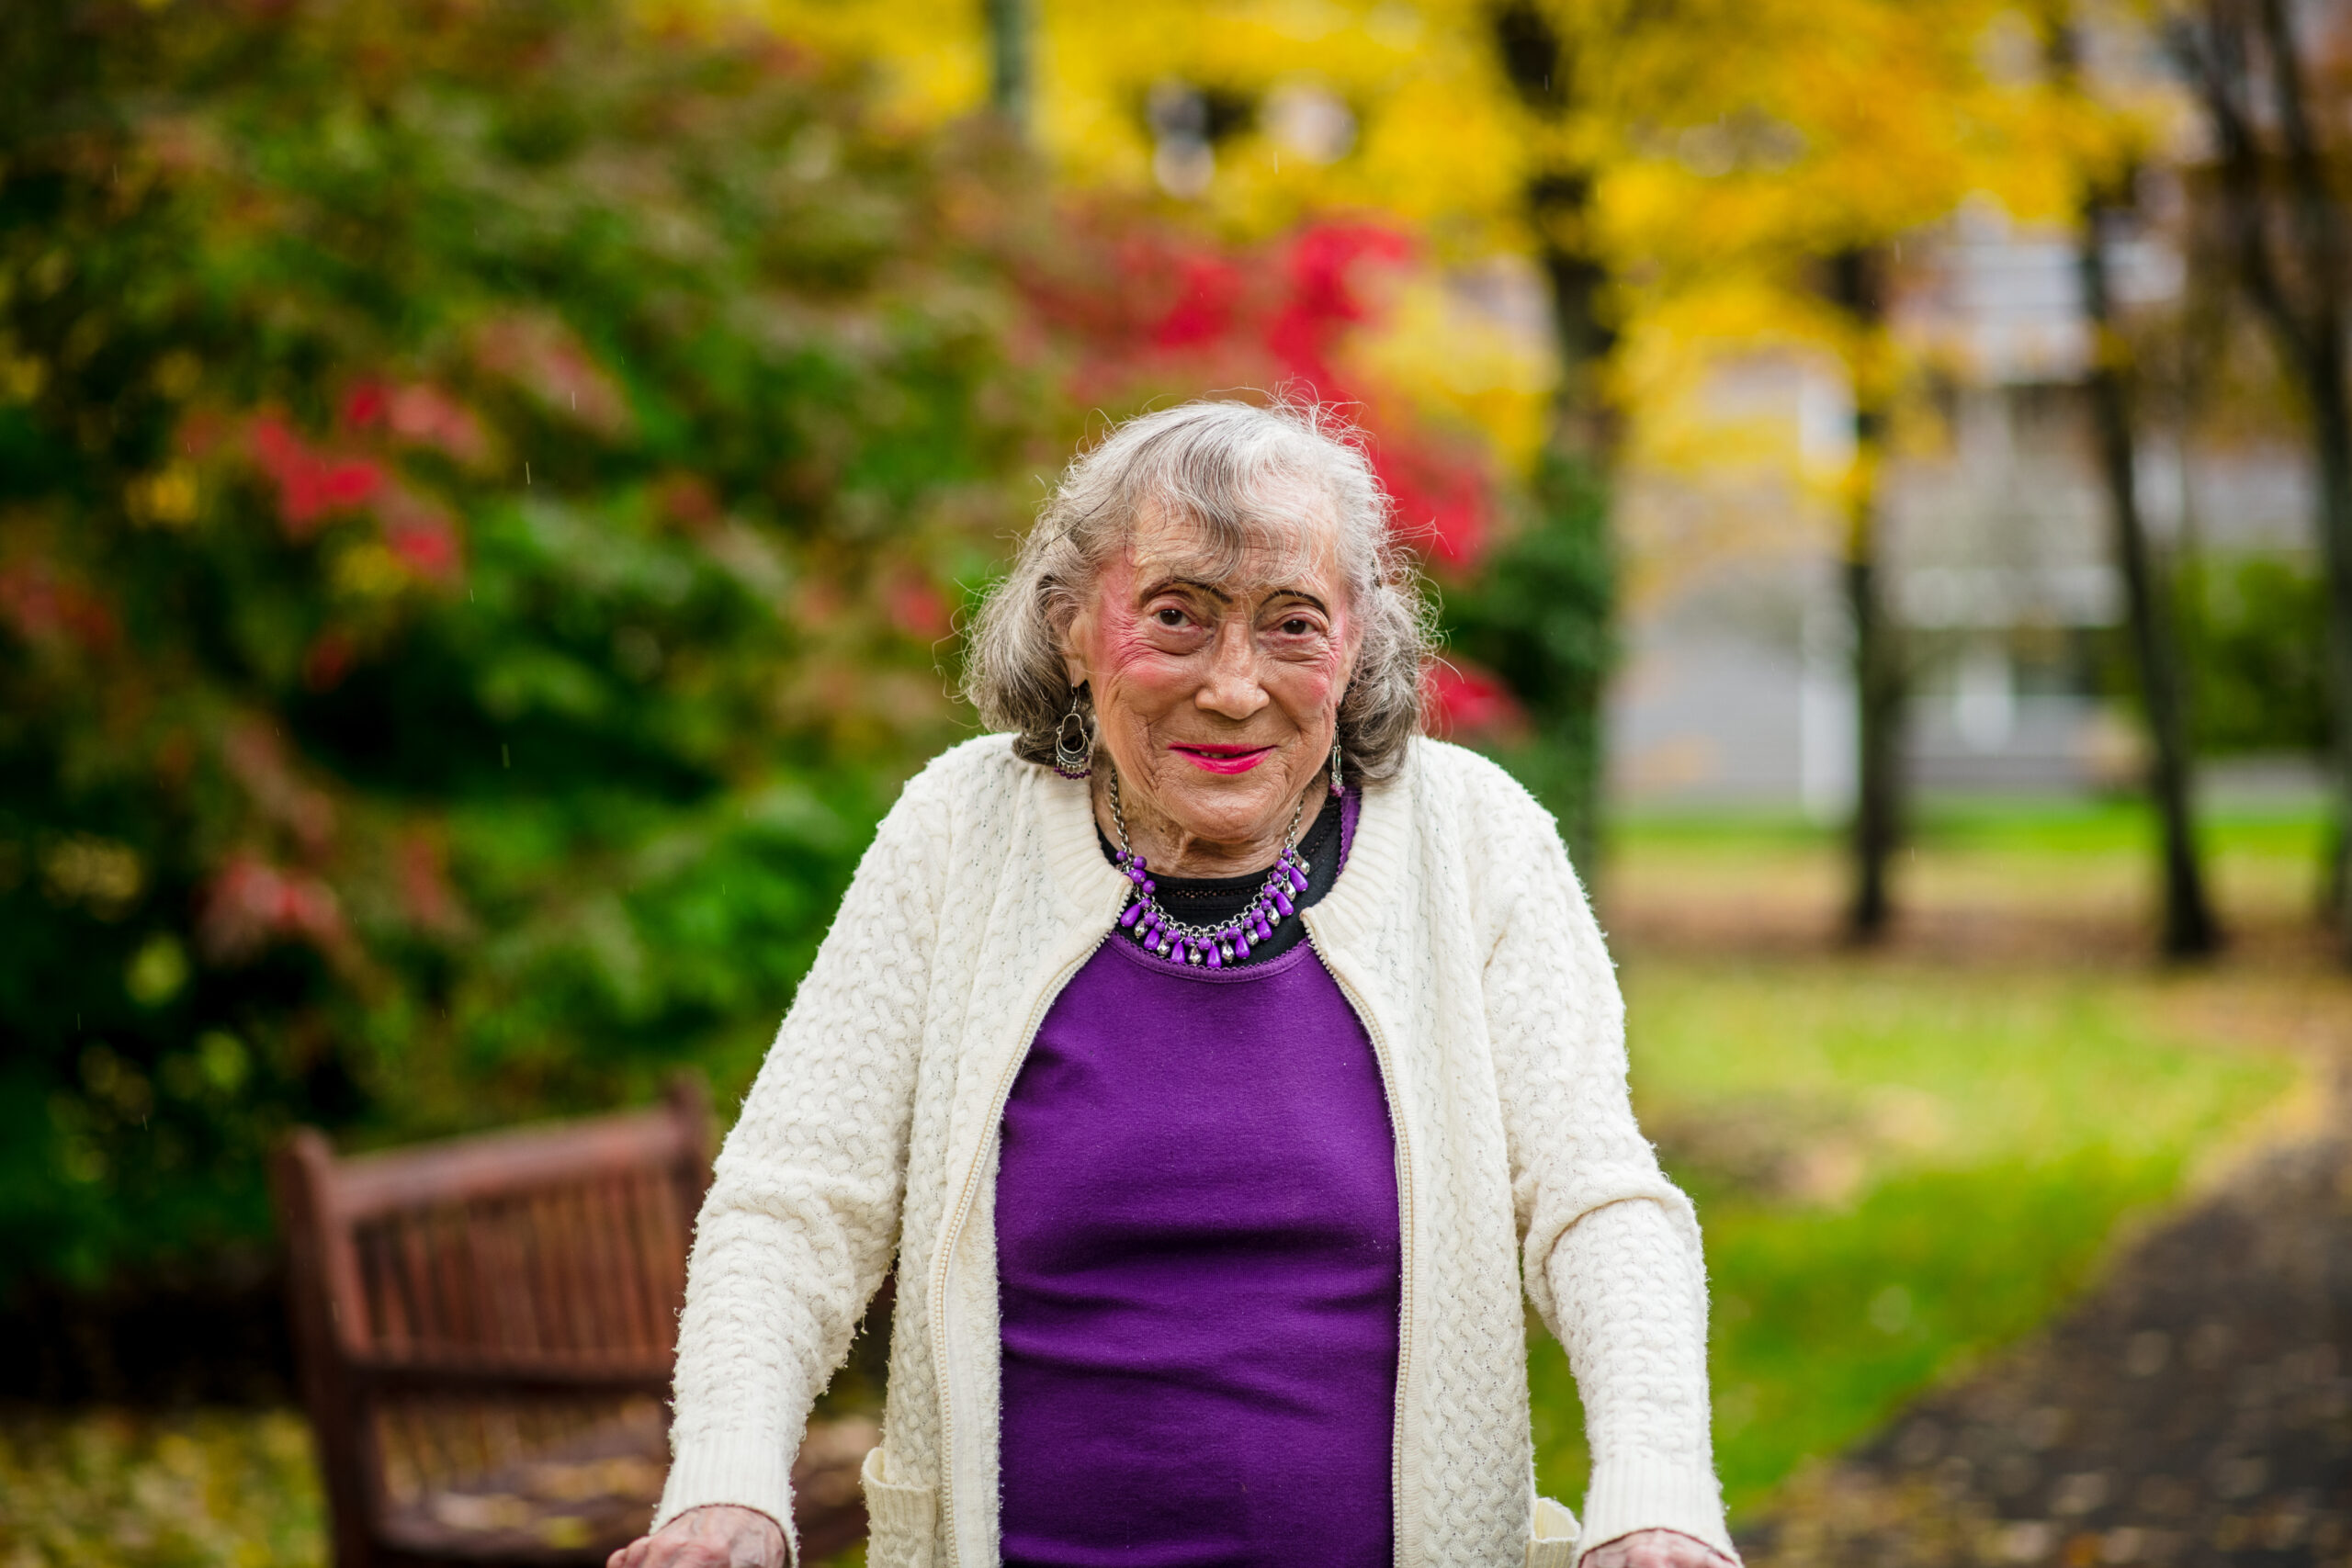 Shirly, an older person with bobbed gray hair and wearing a purple shirt and necklace with a cream-colored cardigan, is pictured in a park. Shirly is enjoying the changing colors of the fall leaves, which are brilliant shades of green, red, orange, and yellow. There is a wooden park bench nearby, and green grass and a walking trail are in the background. Whether or not someone has access to neighborhood green spaces, like a local park, is one example of a social determinant of health. 